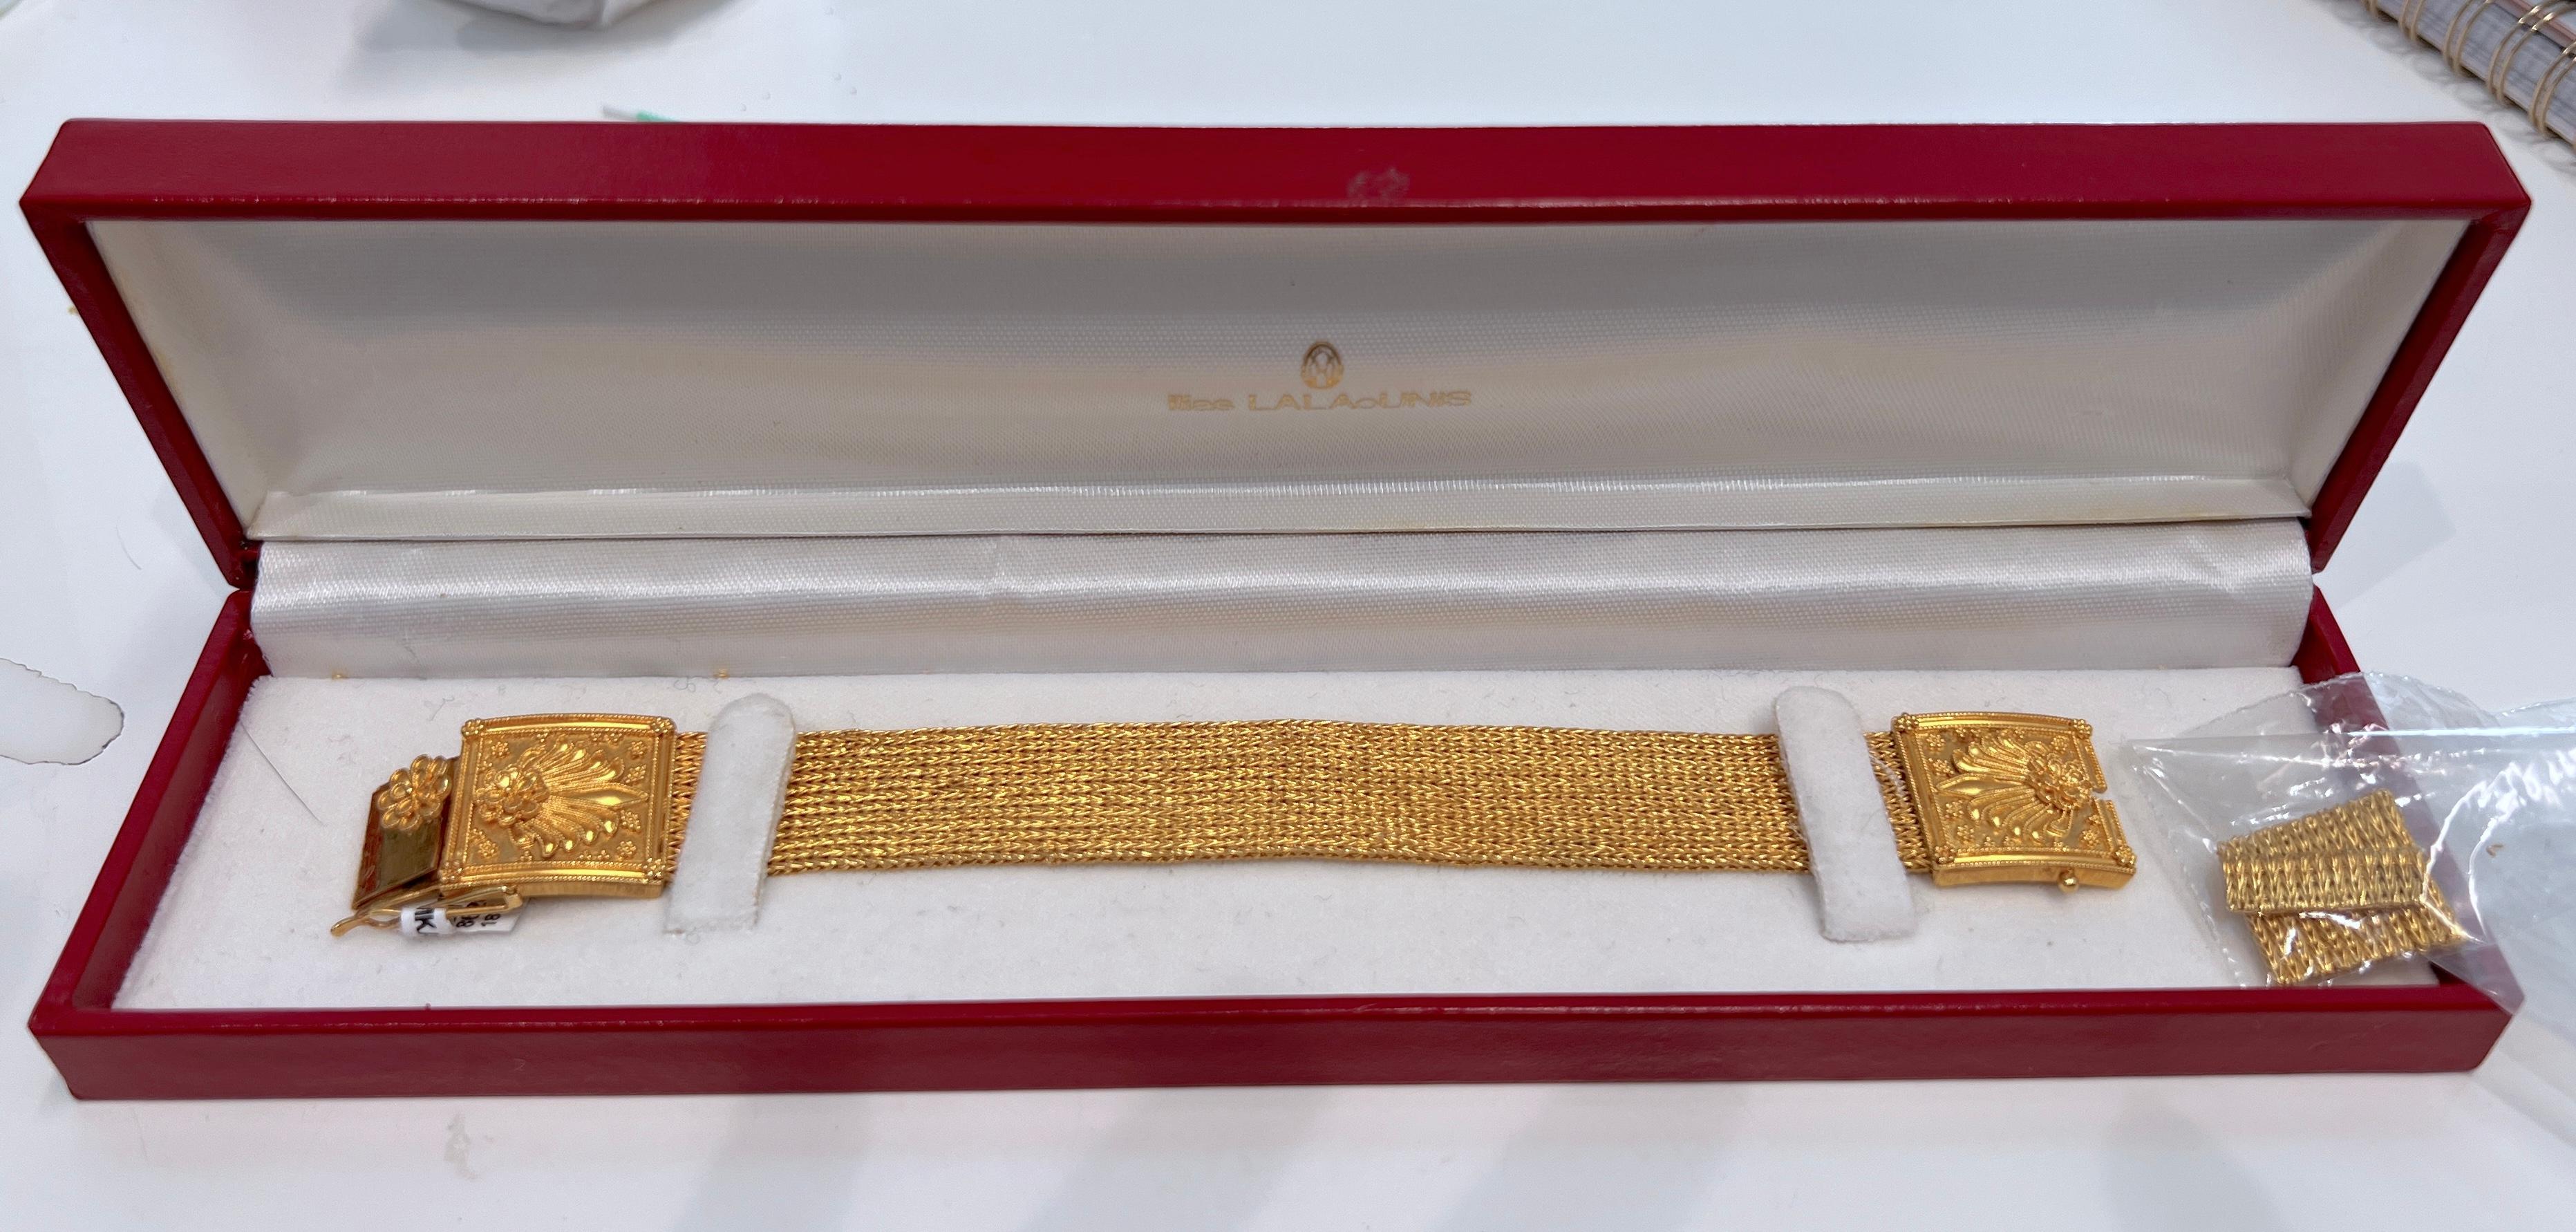 Ilias  LALAoUNIS 18 karat yellow gold flexible mesh wheat link bracelet. Handcrafted in Greece, the delicately woven bracelet reflects the mastery and heritage of Lalaounis's renowned artistry. 
The flexible mesh wheat link design measures 6.25